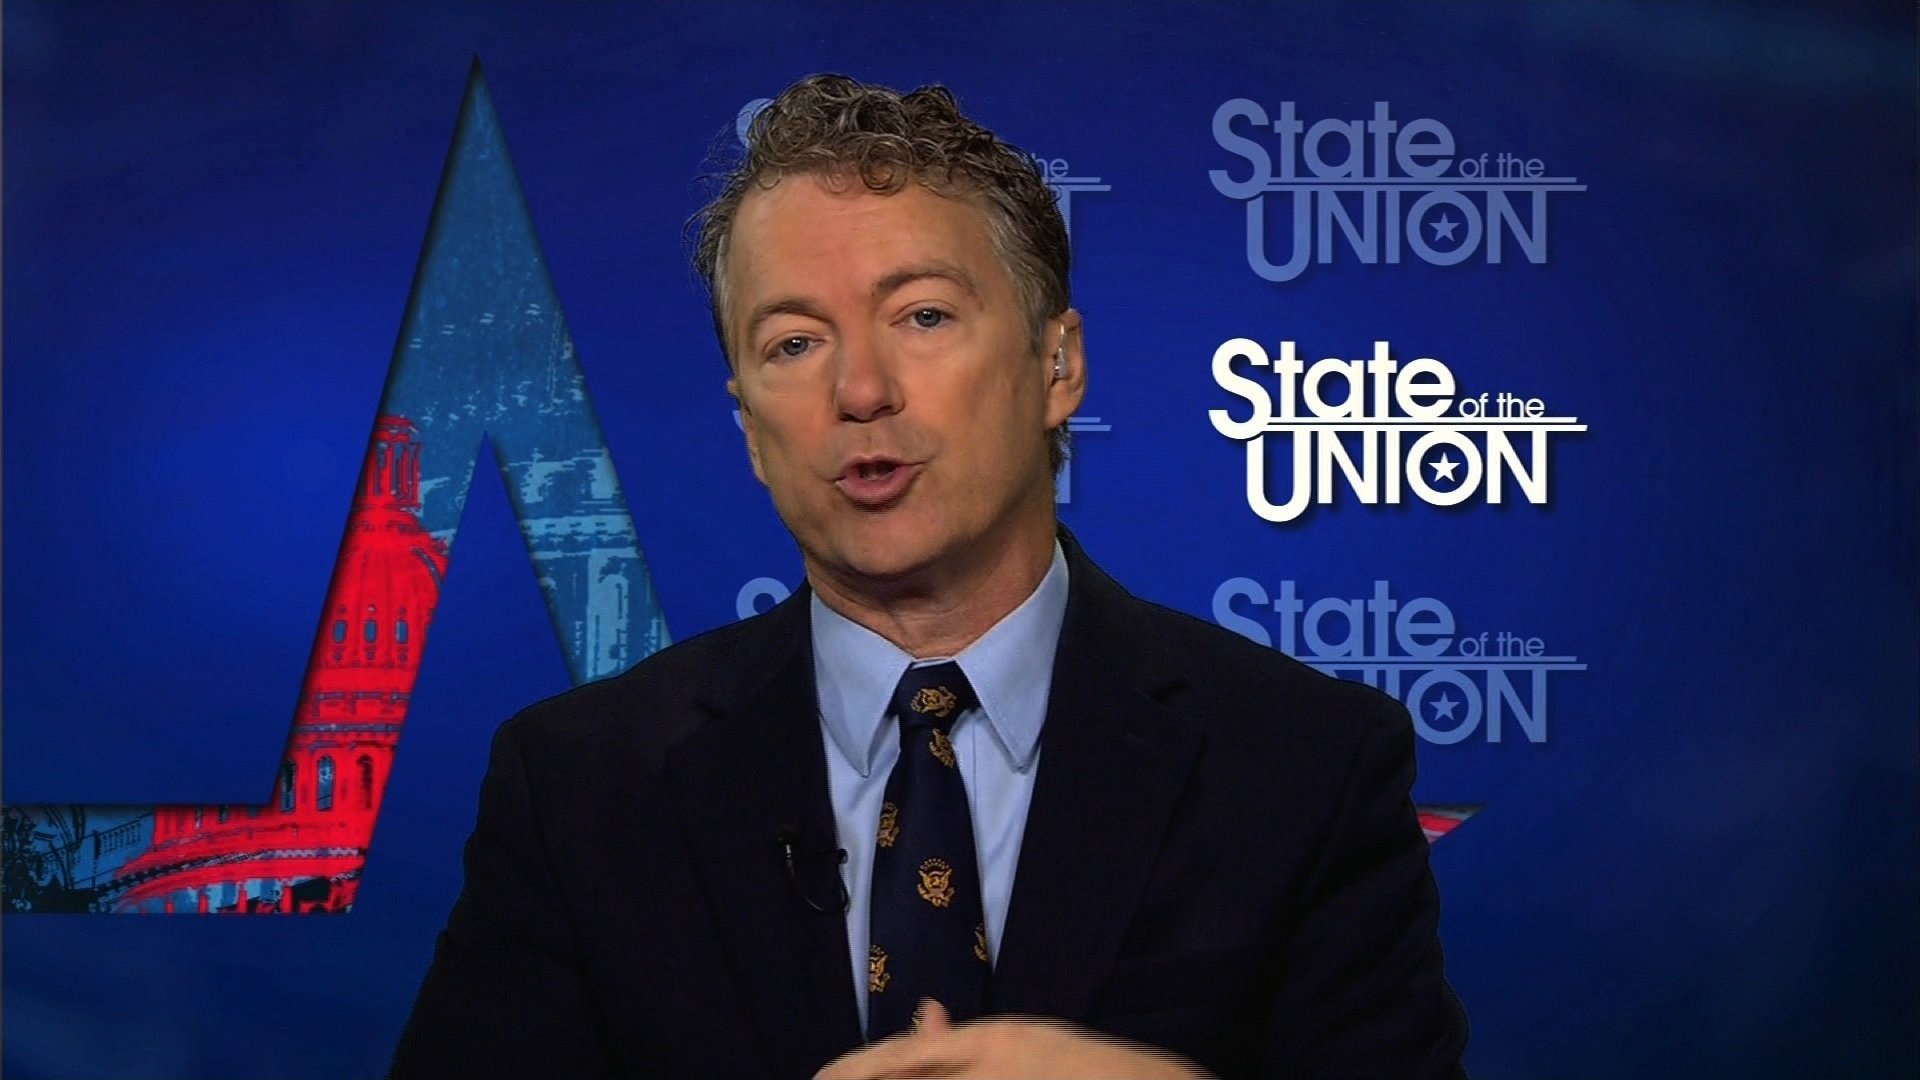 Rand Paul previews Obamacare replacement plan